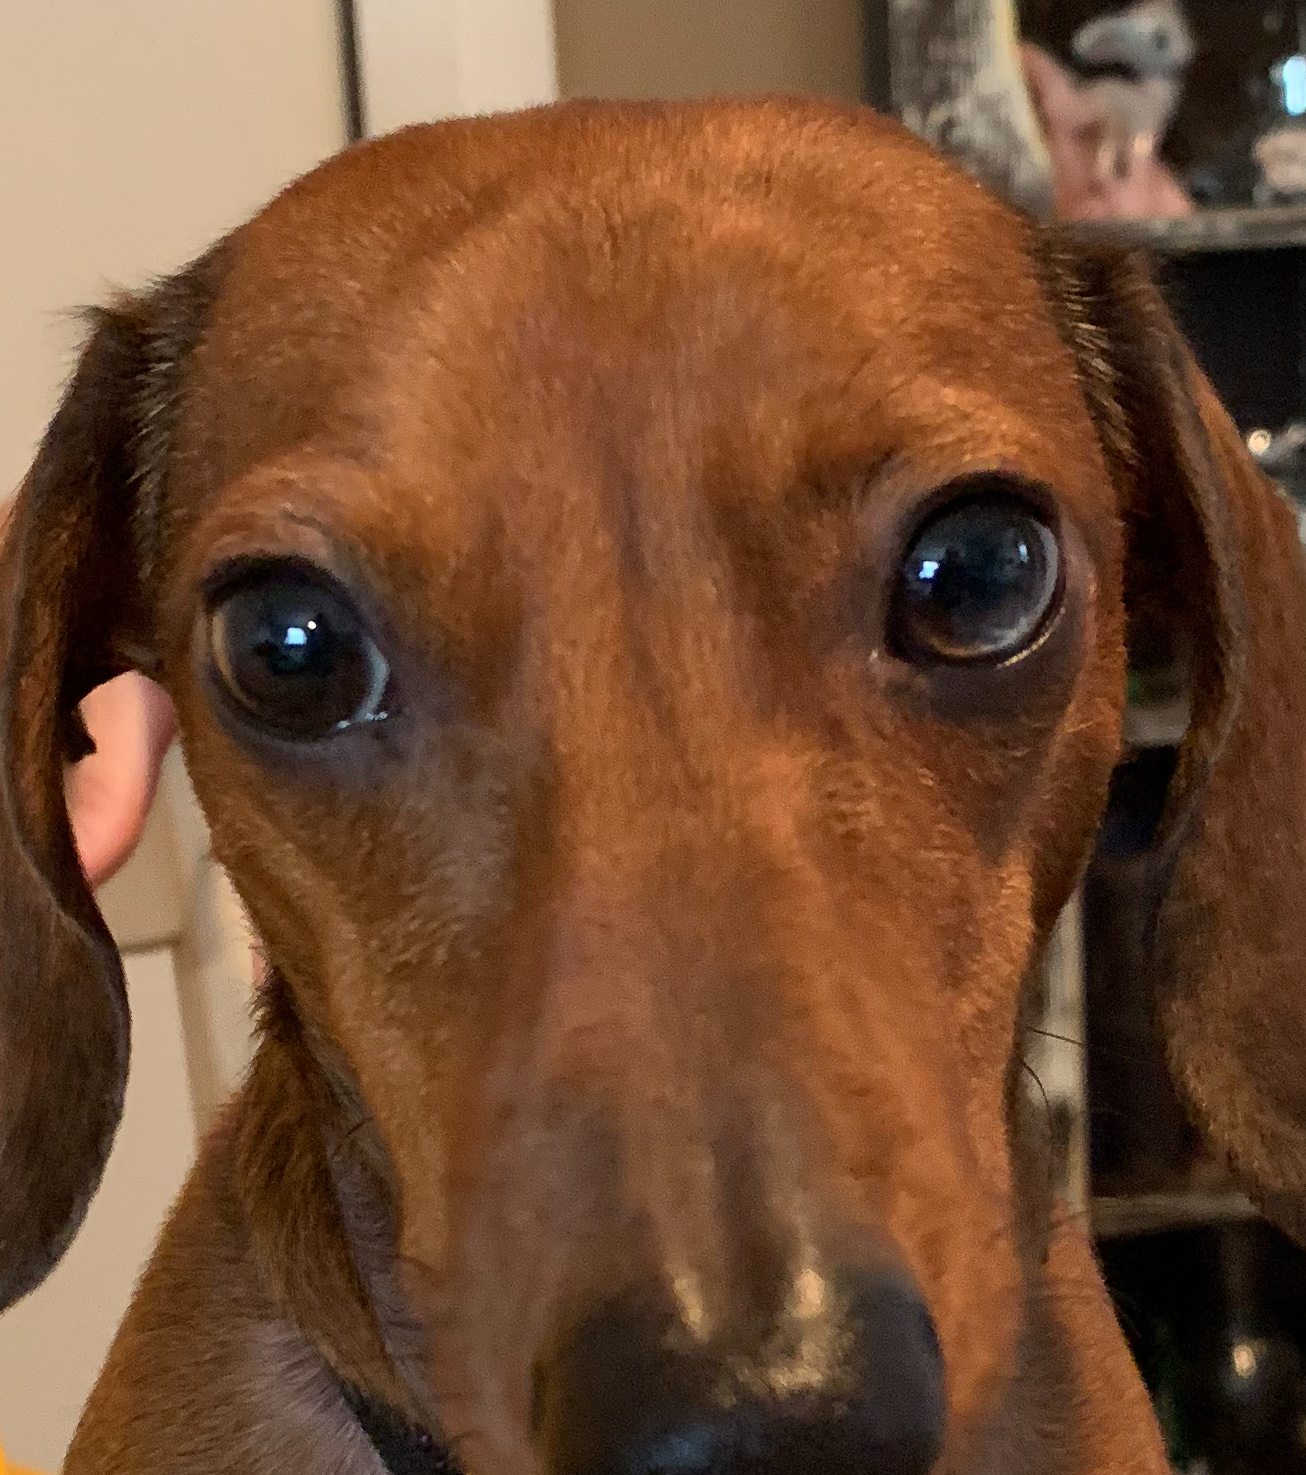 Soulful eyes of a spoiled rotten miniature dachshund would melt anyone's heart.